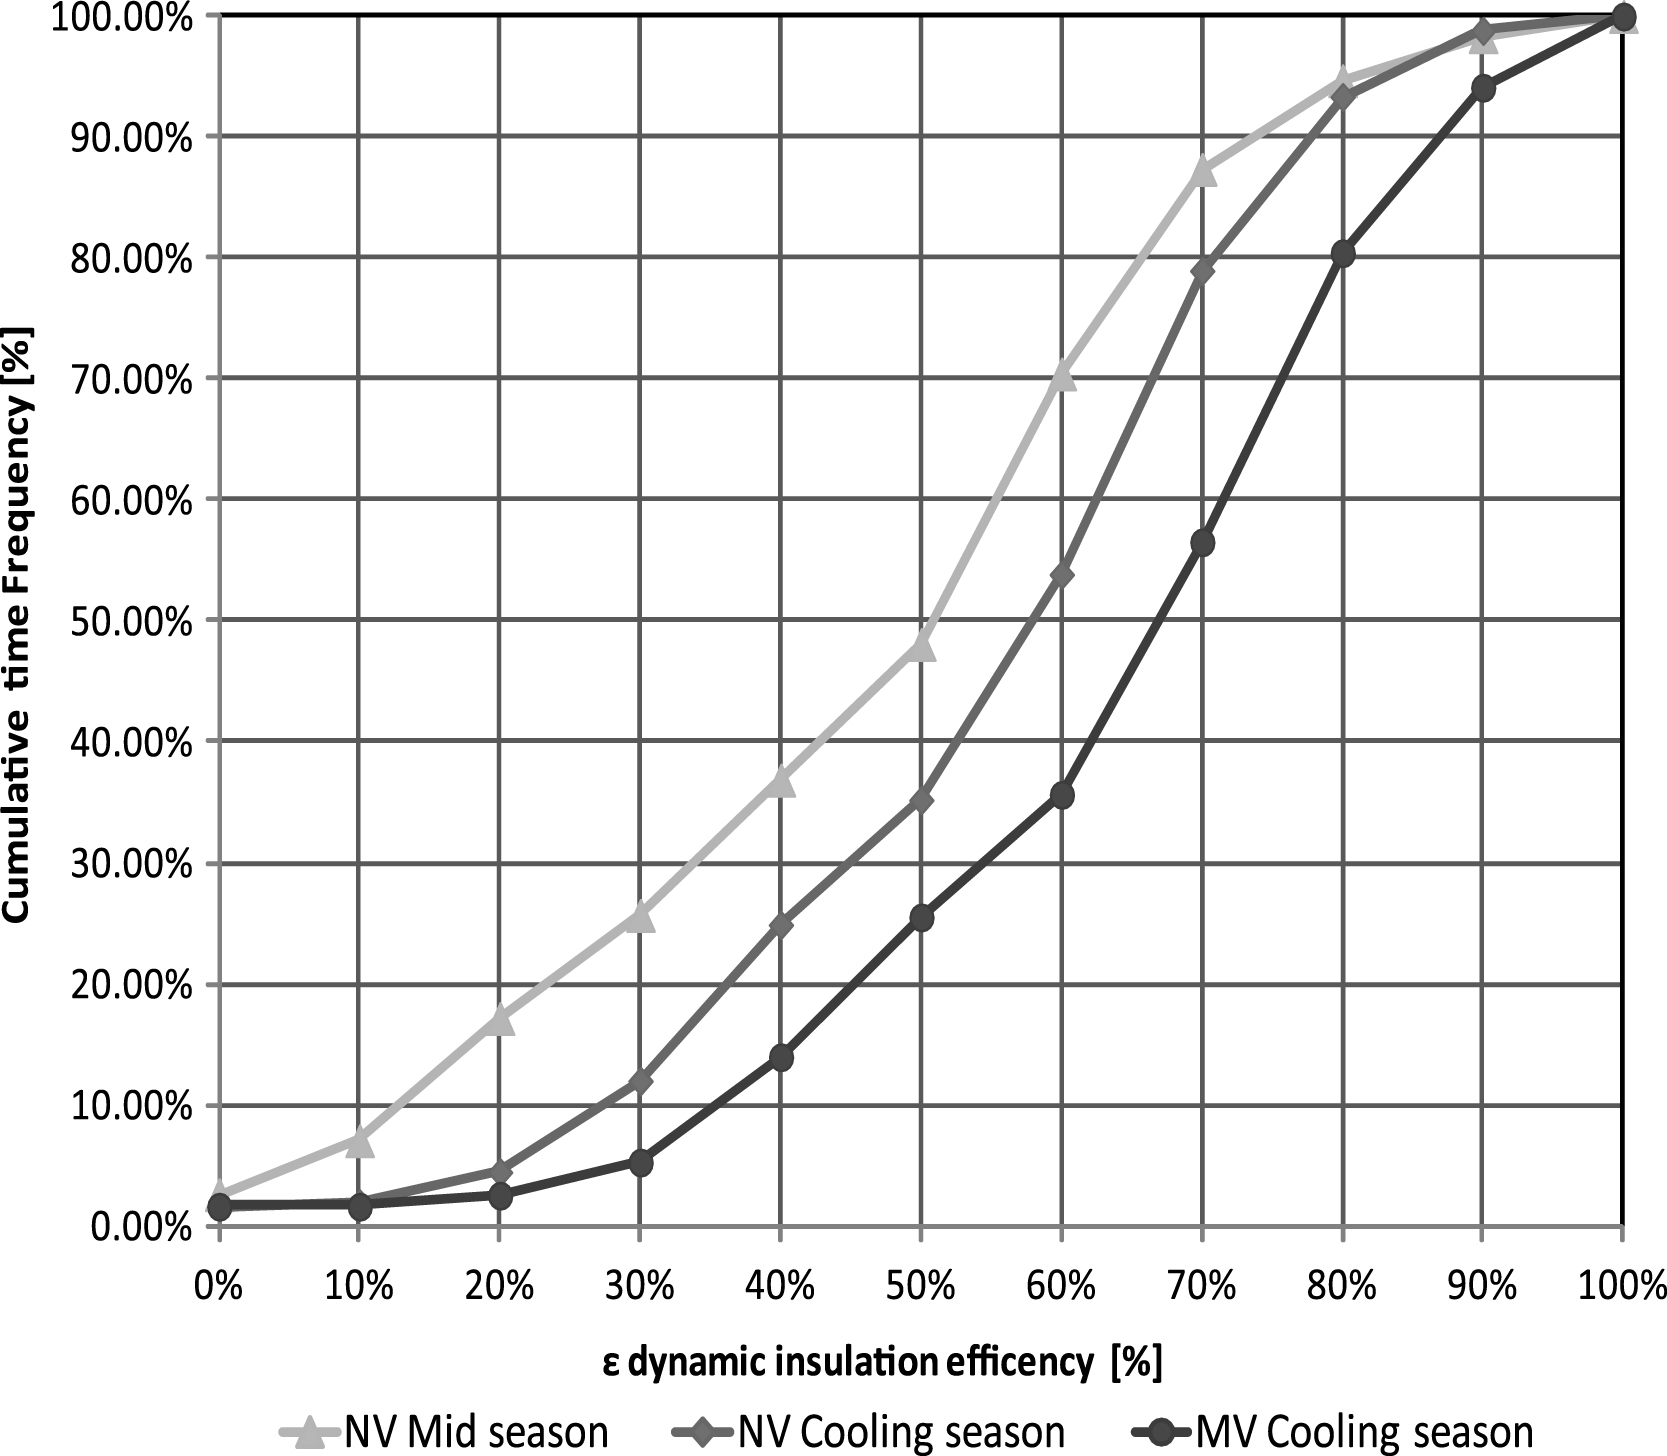 Cumulated frequency of dynamic insulation efficiency.